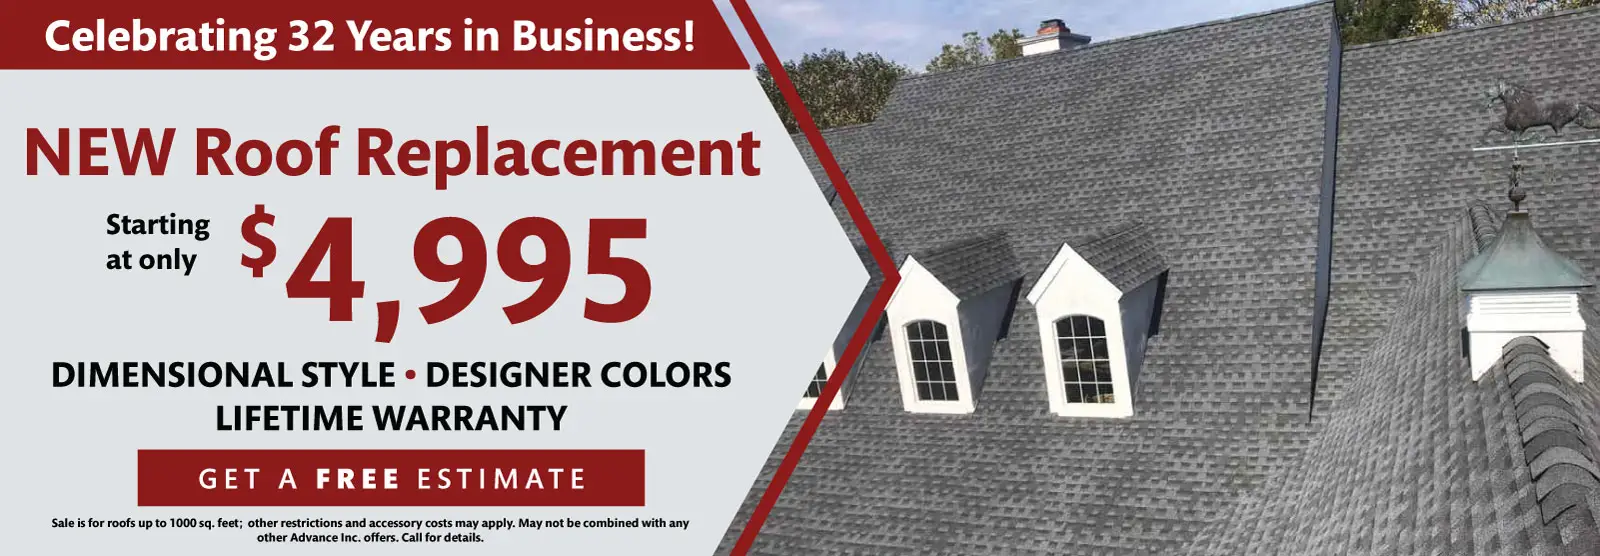 New Roof Replacement starting at $4995